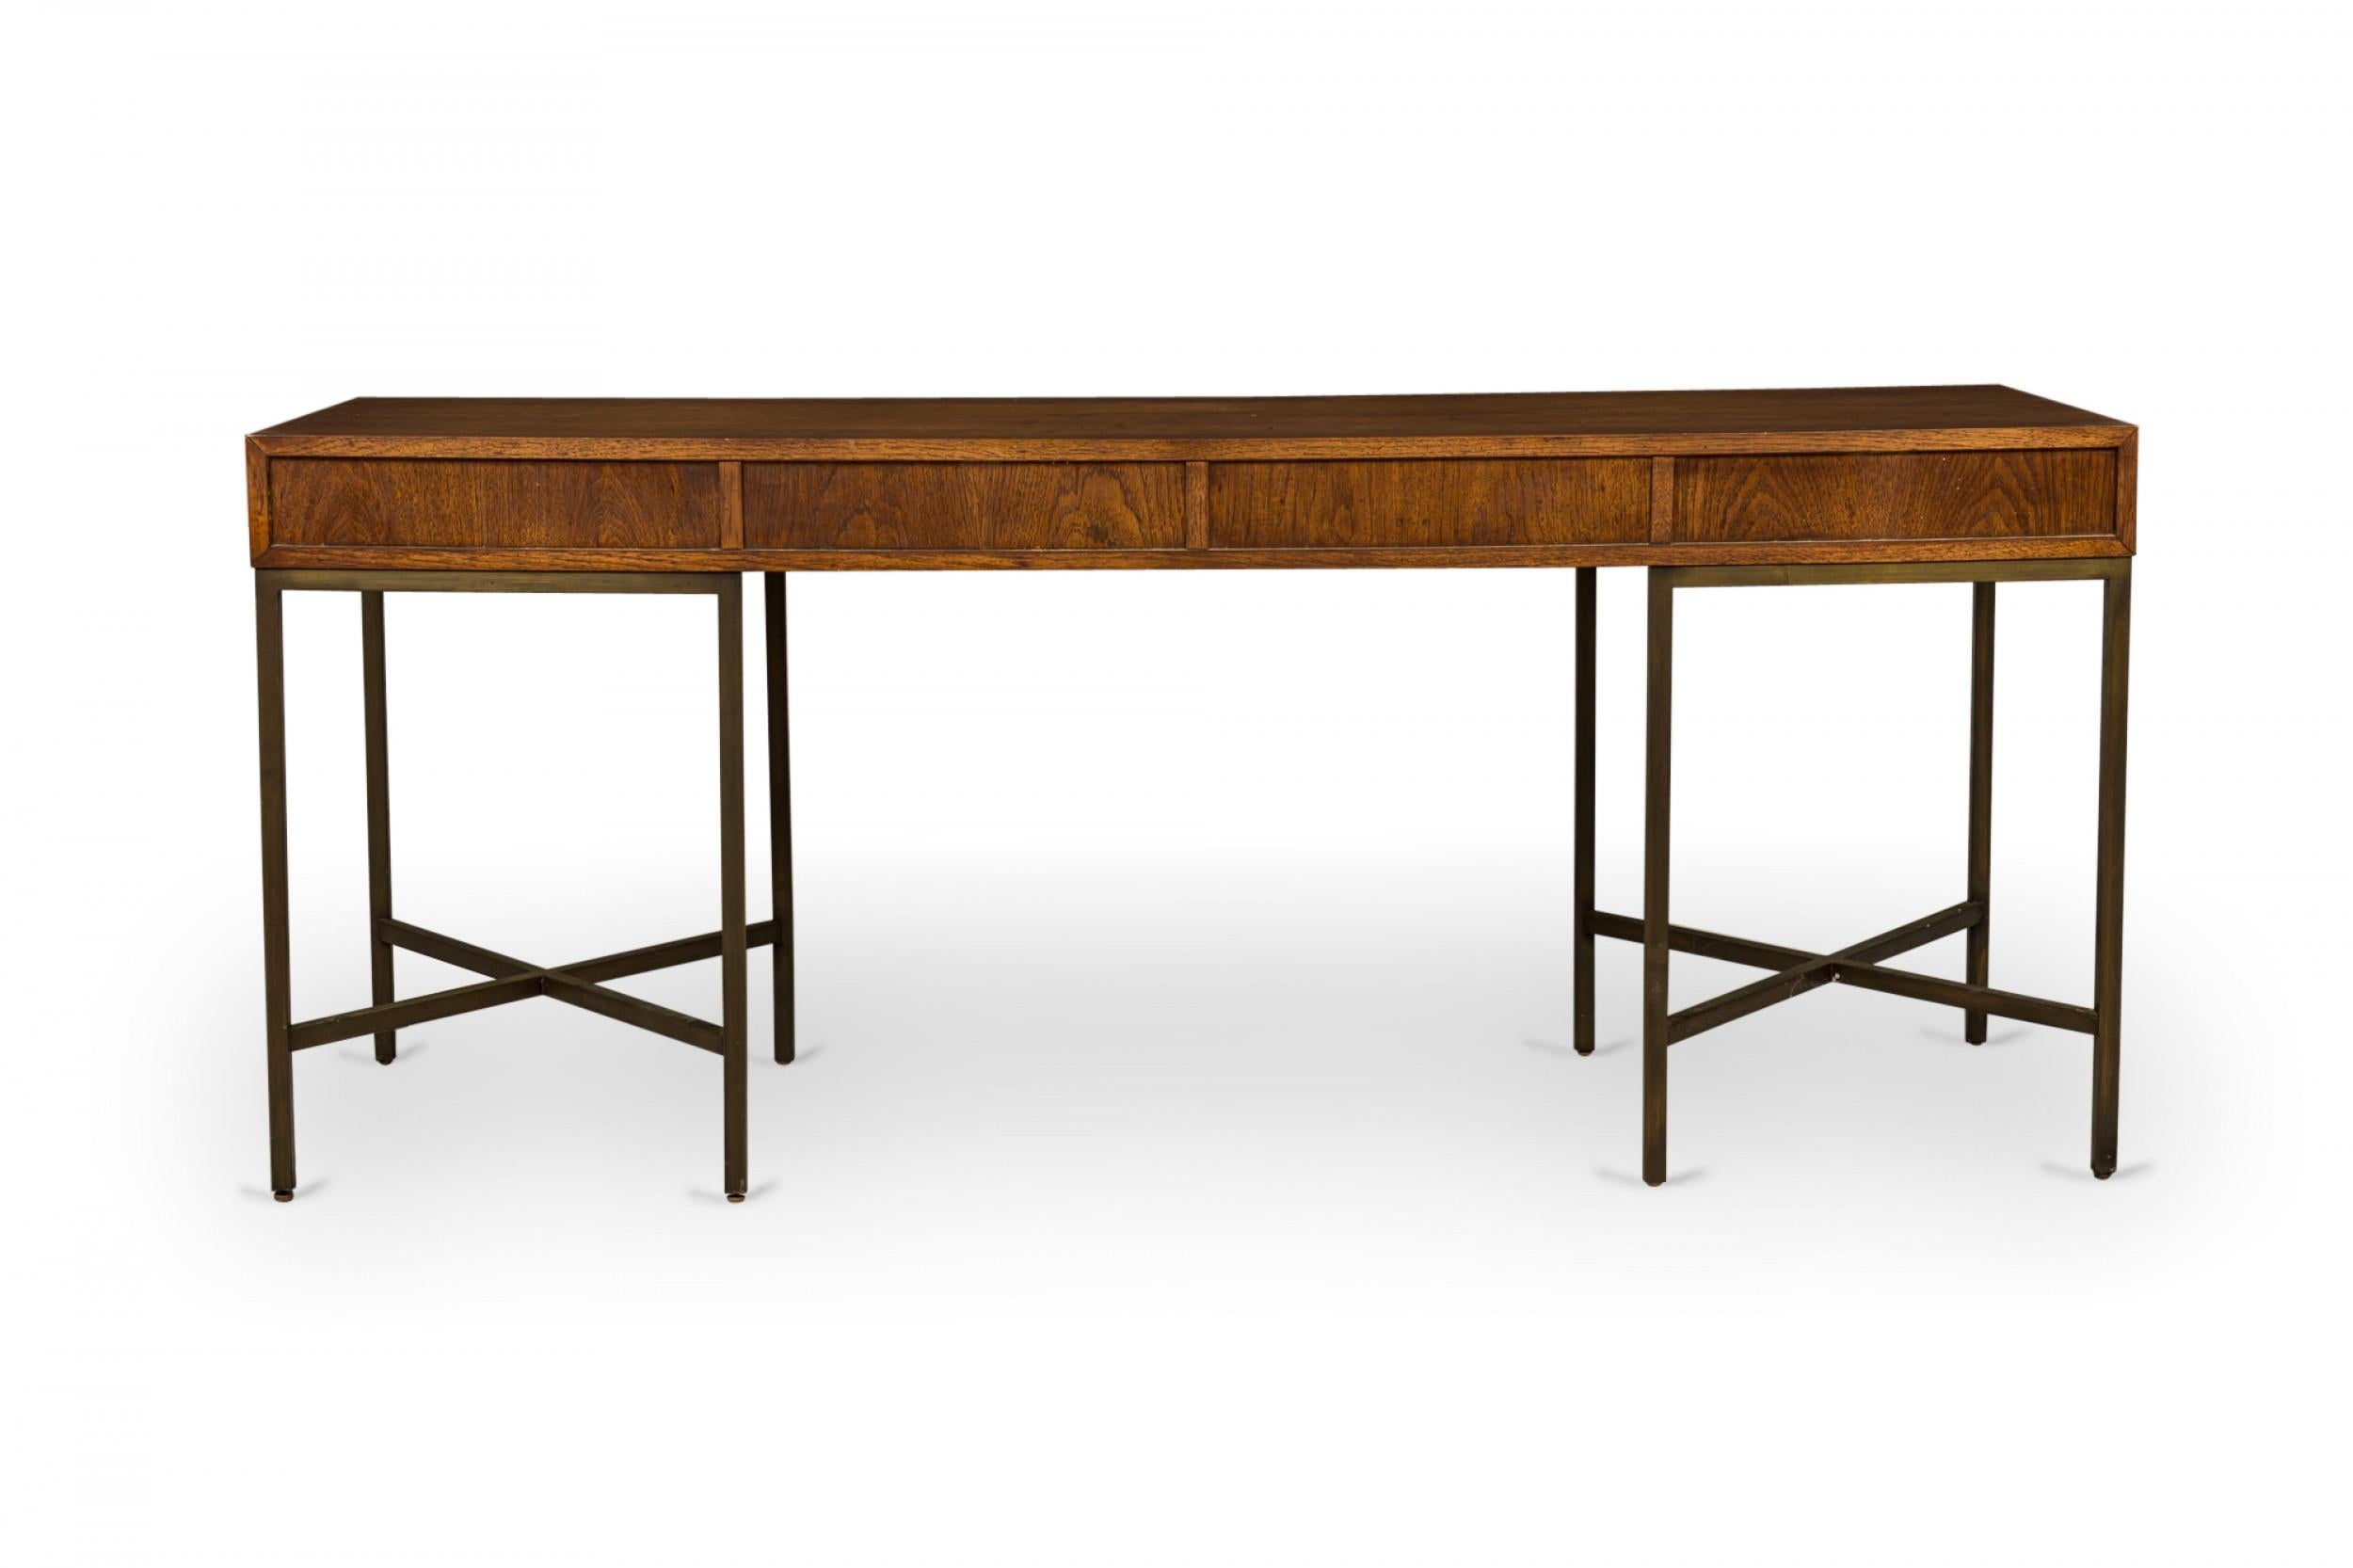 Founders Furniture Co. Rectangular Walnut and Bronze Desk In Good Condition For Sale In New York, NY